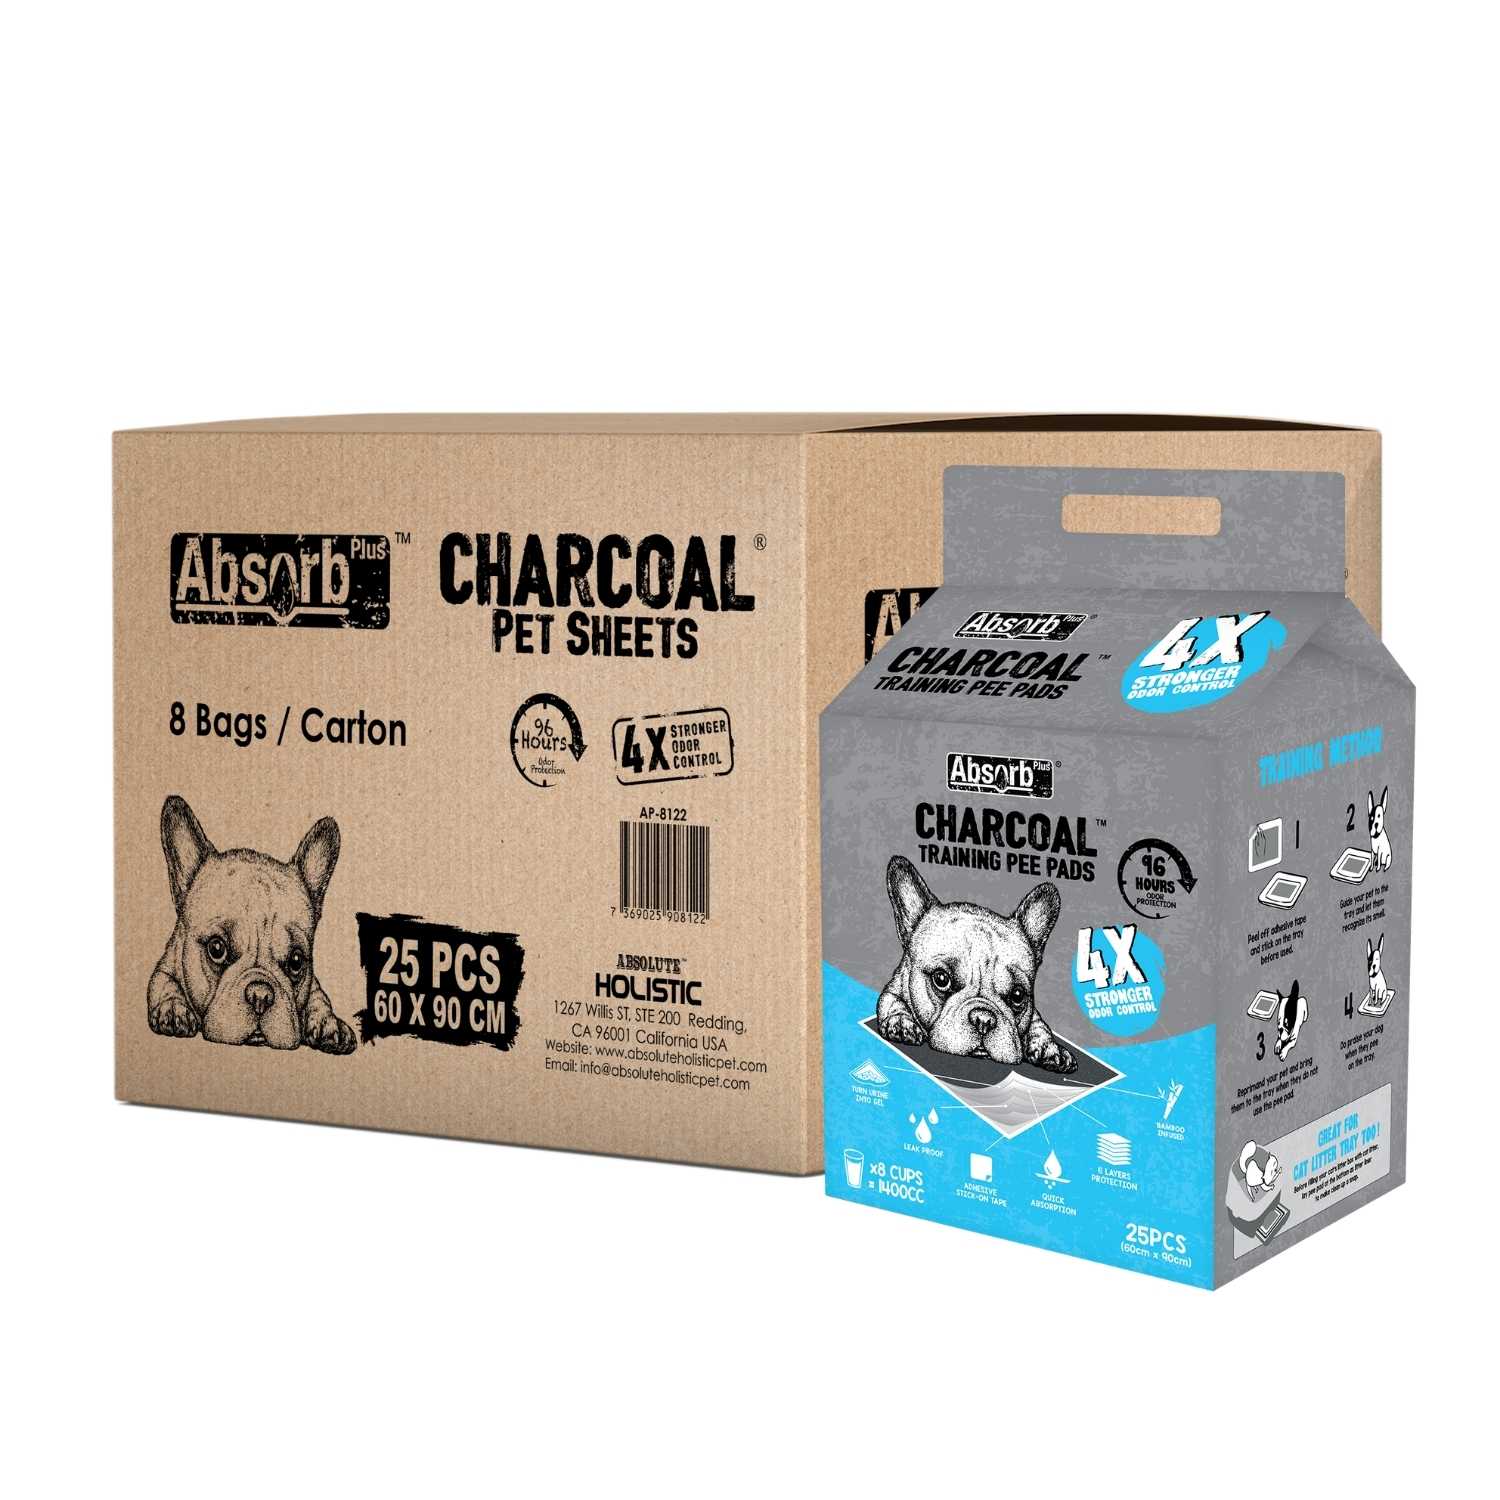 Absorb Plus - Charcoal Pet Sheets for Dogs (3 Sizes)